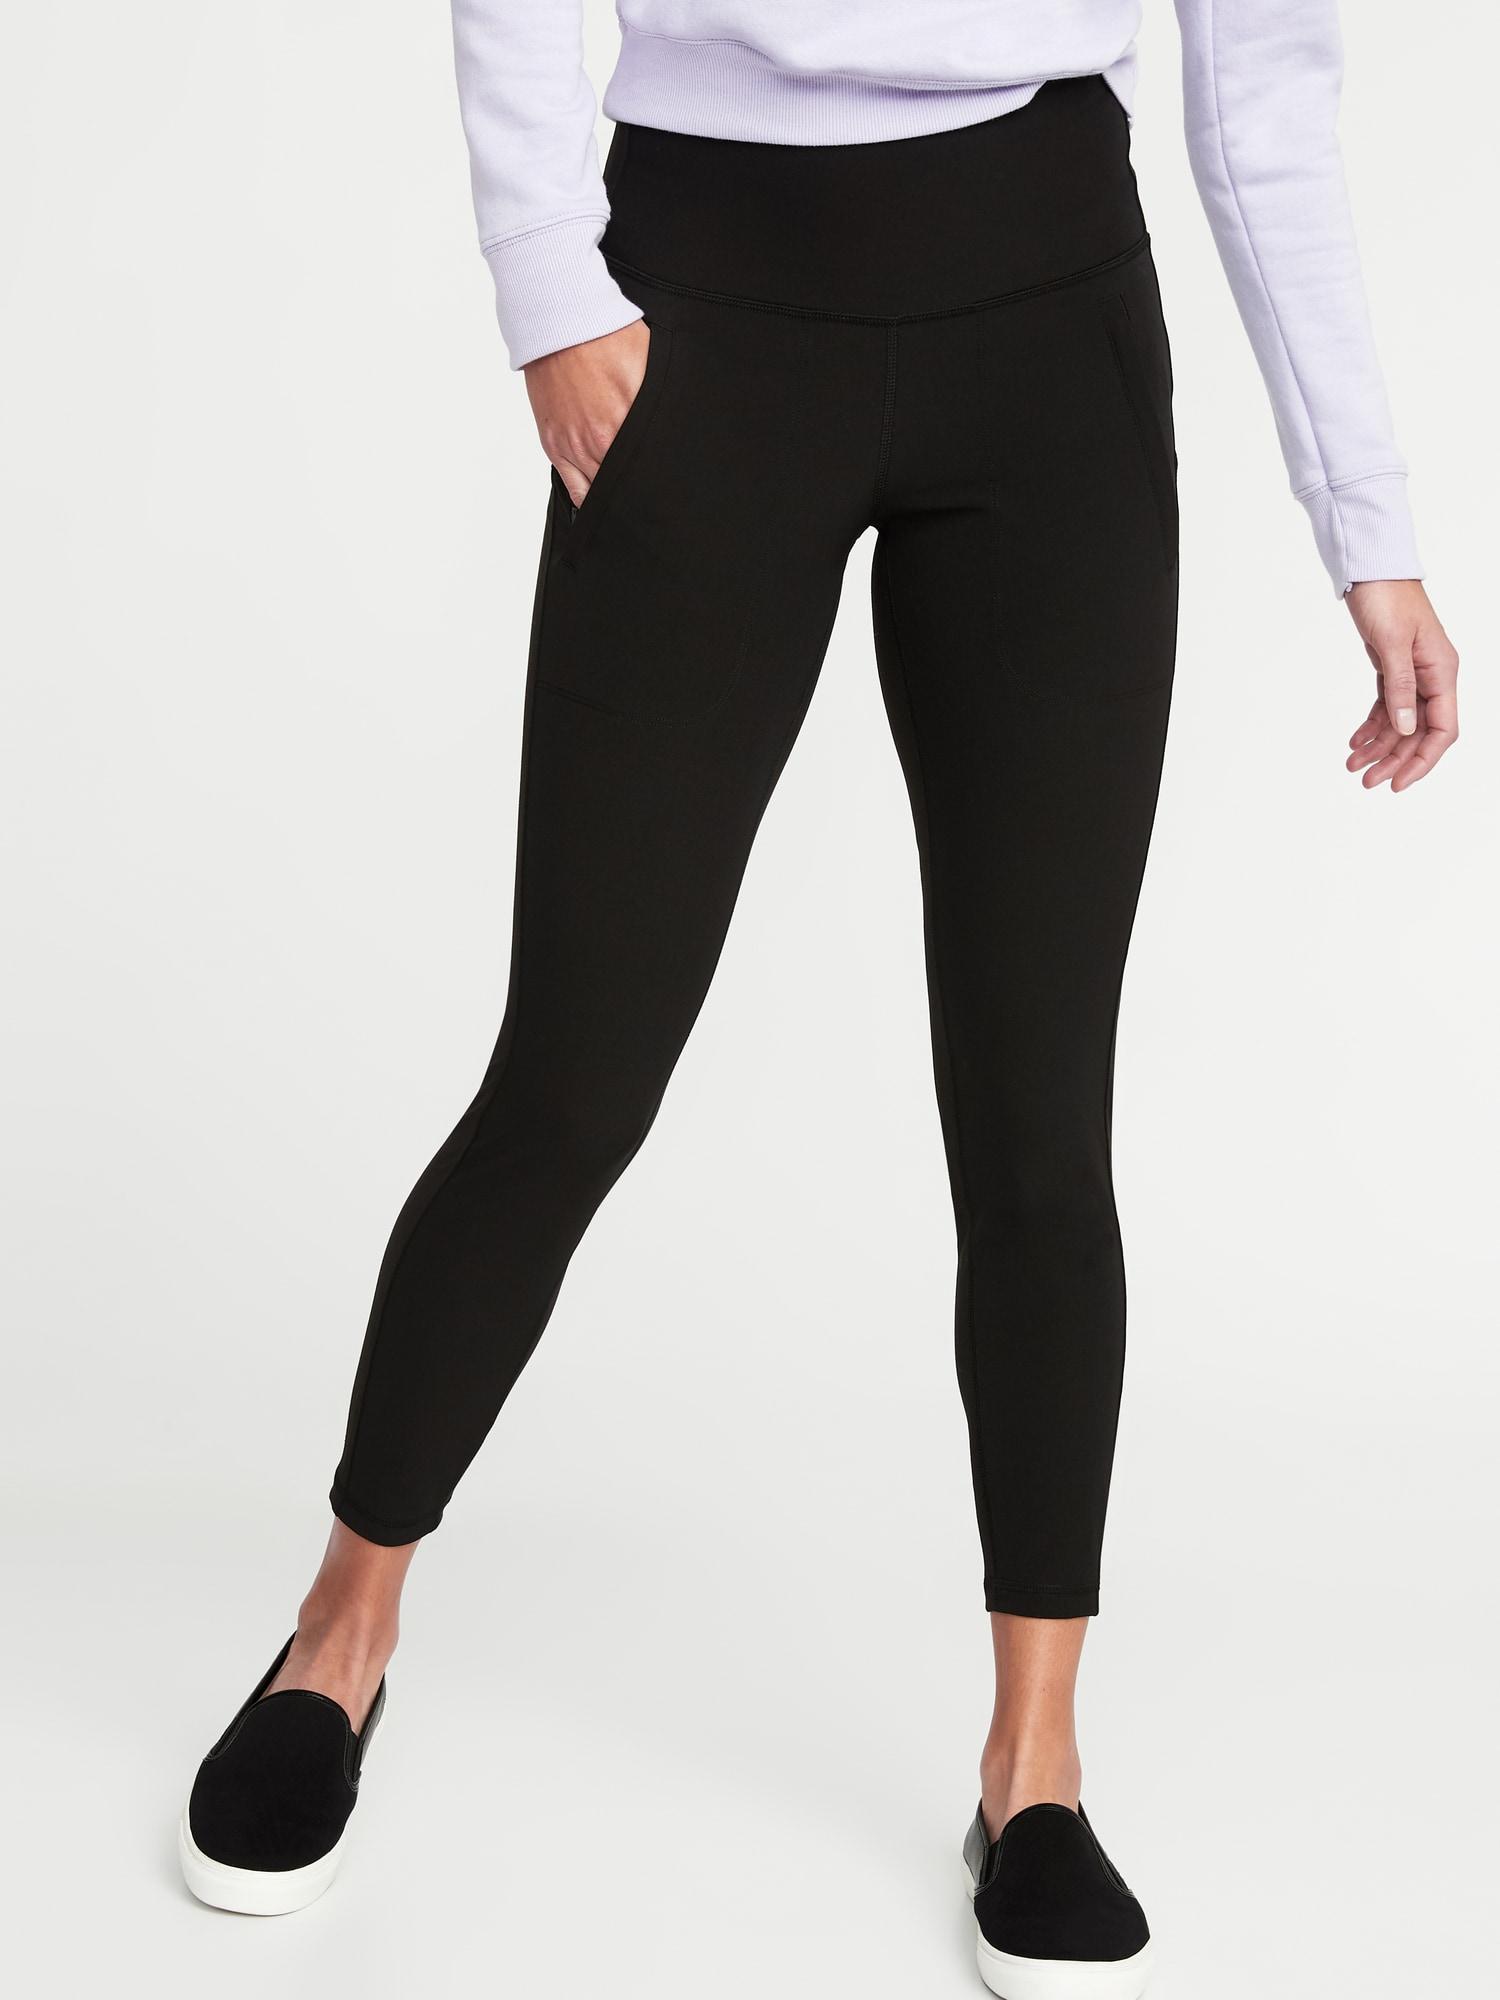 Old Navy Powerchill Leggings Reviewed  International Society of Precision  Agriculture